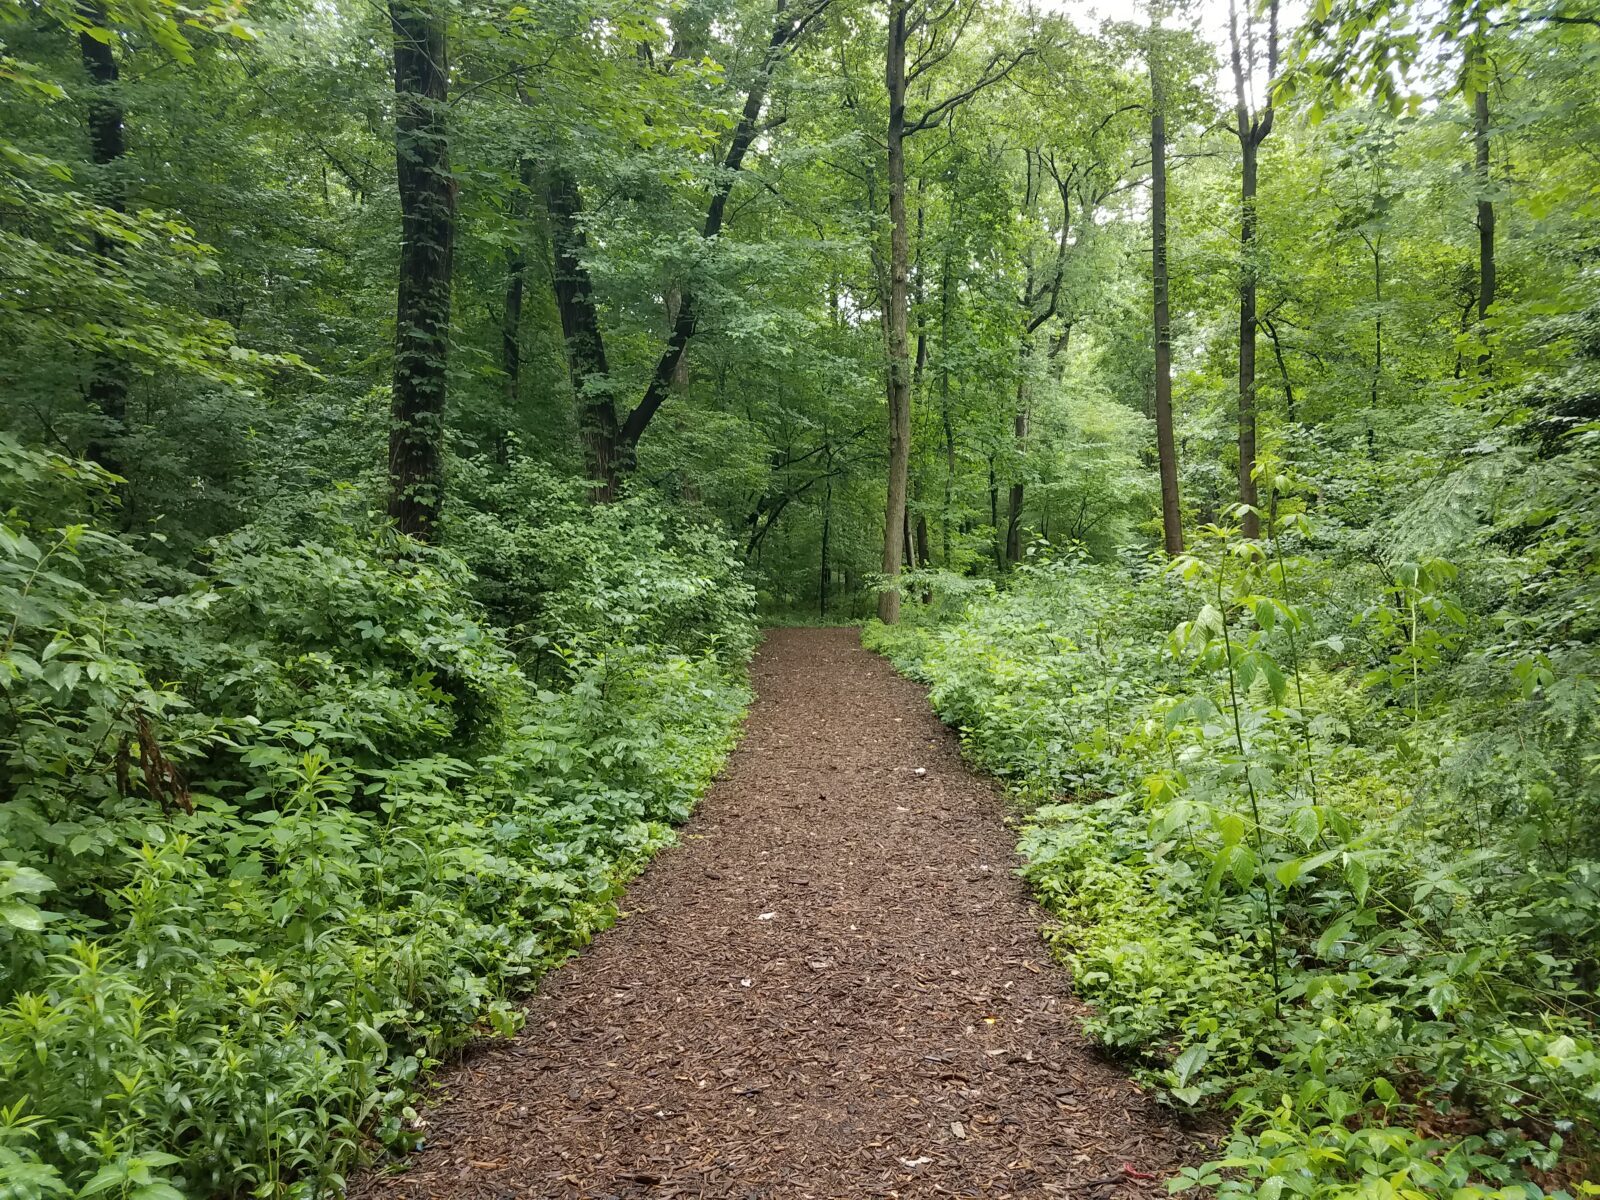 brown mulch trail in the woods with green trees